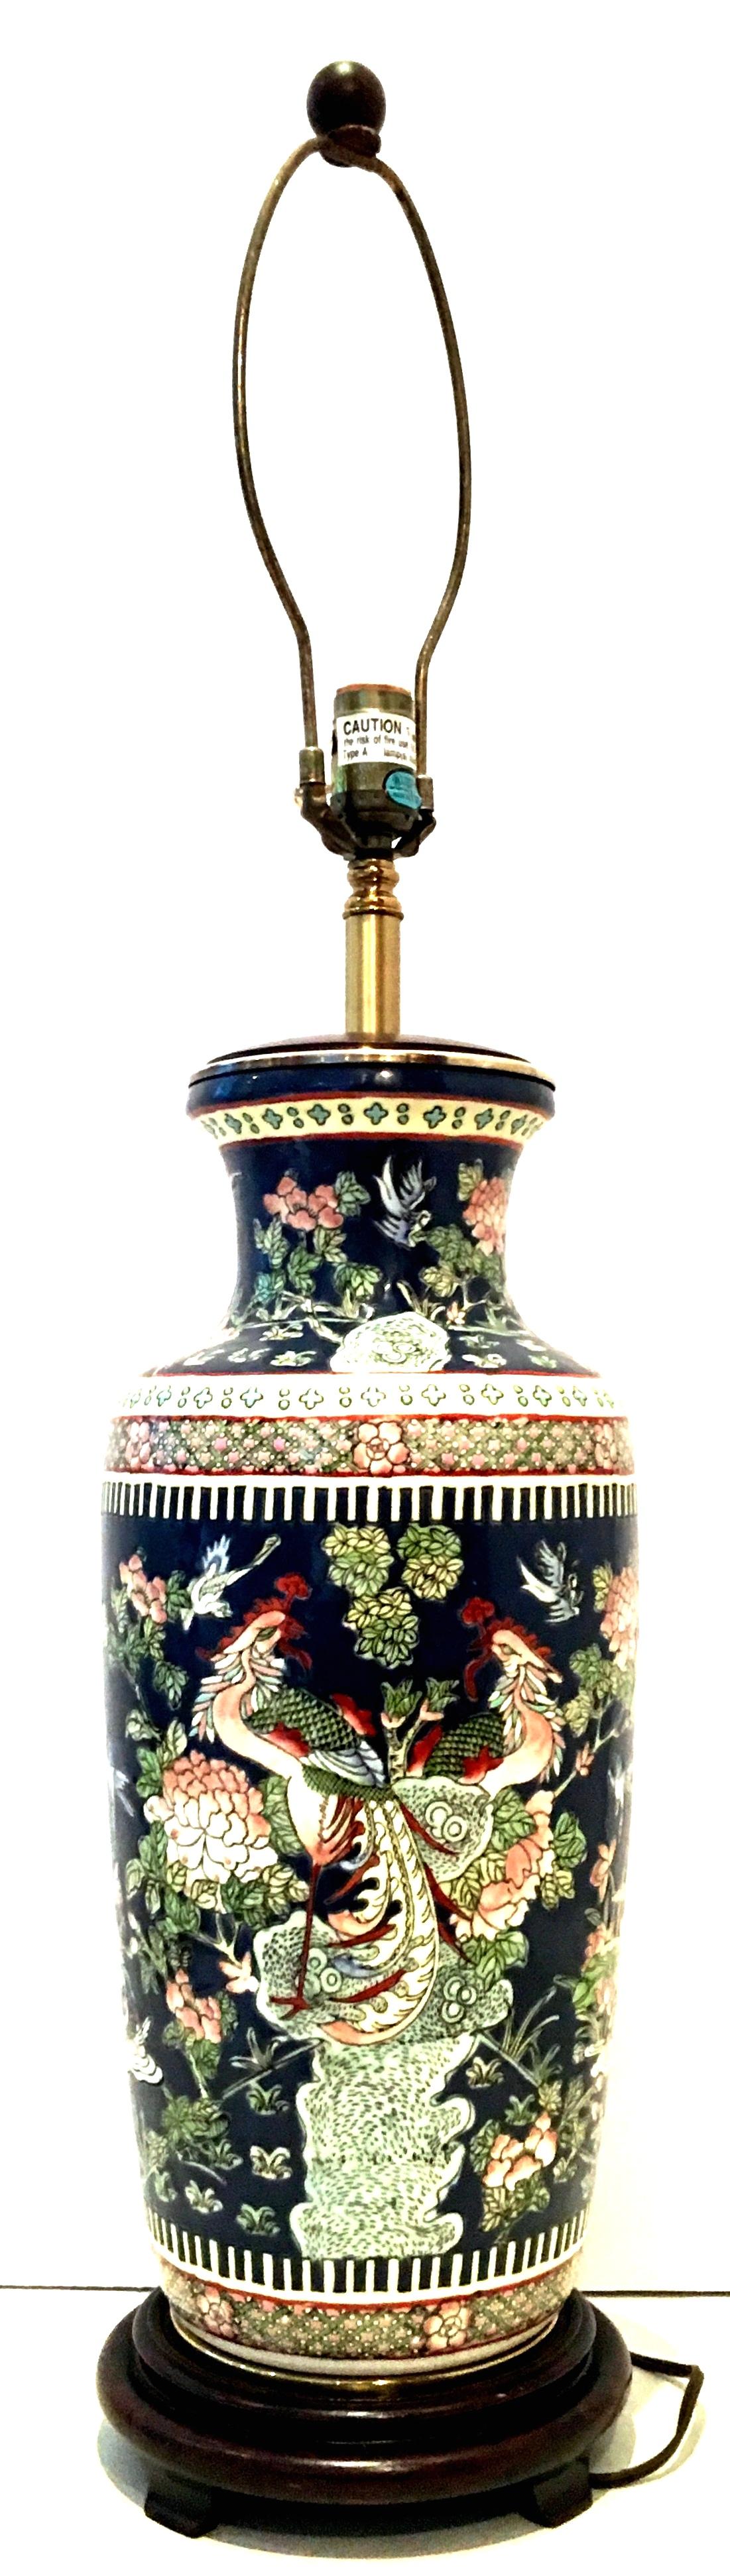 Mid-20th Century large Famille hand painted porcelain and brass wood mounted lamp. This finely crafted hand painted lamp features a navy blue ground with green, pink, robins egg blue, red and yellow peacock, flora, birds, eggs and ducks motif.